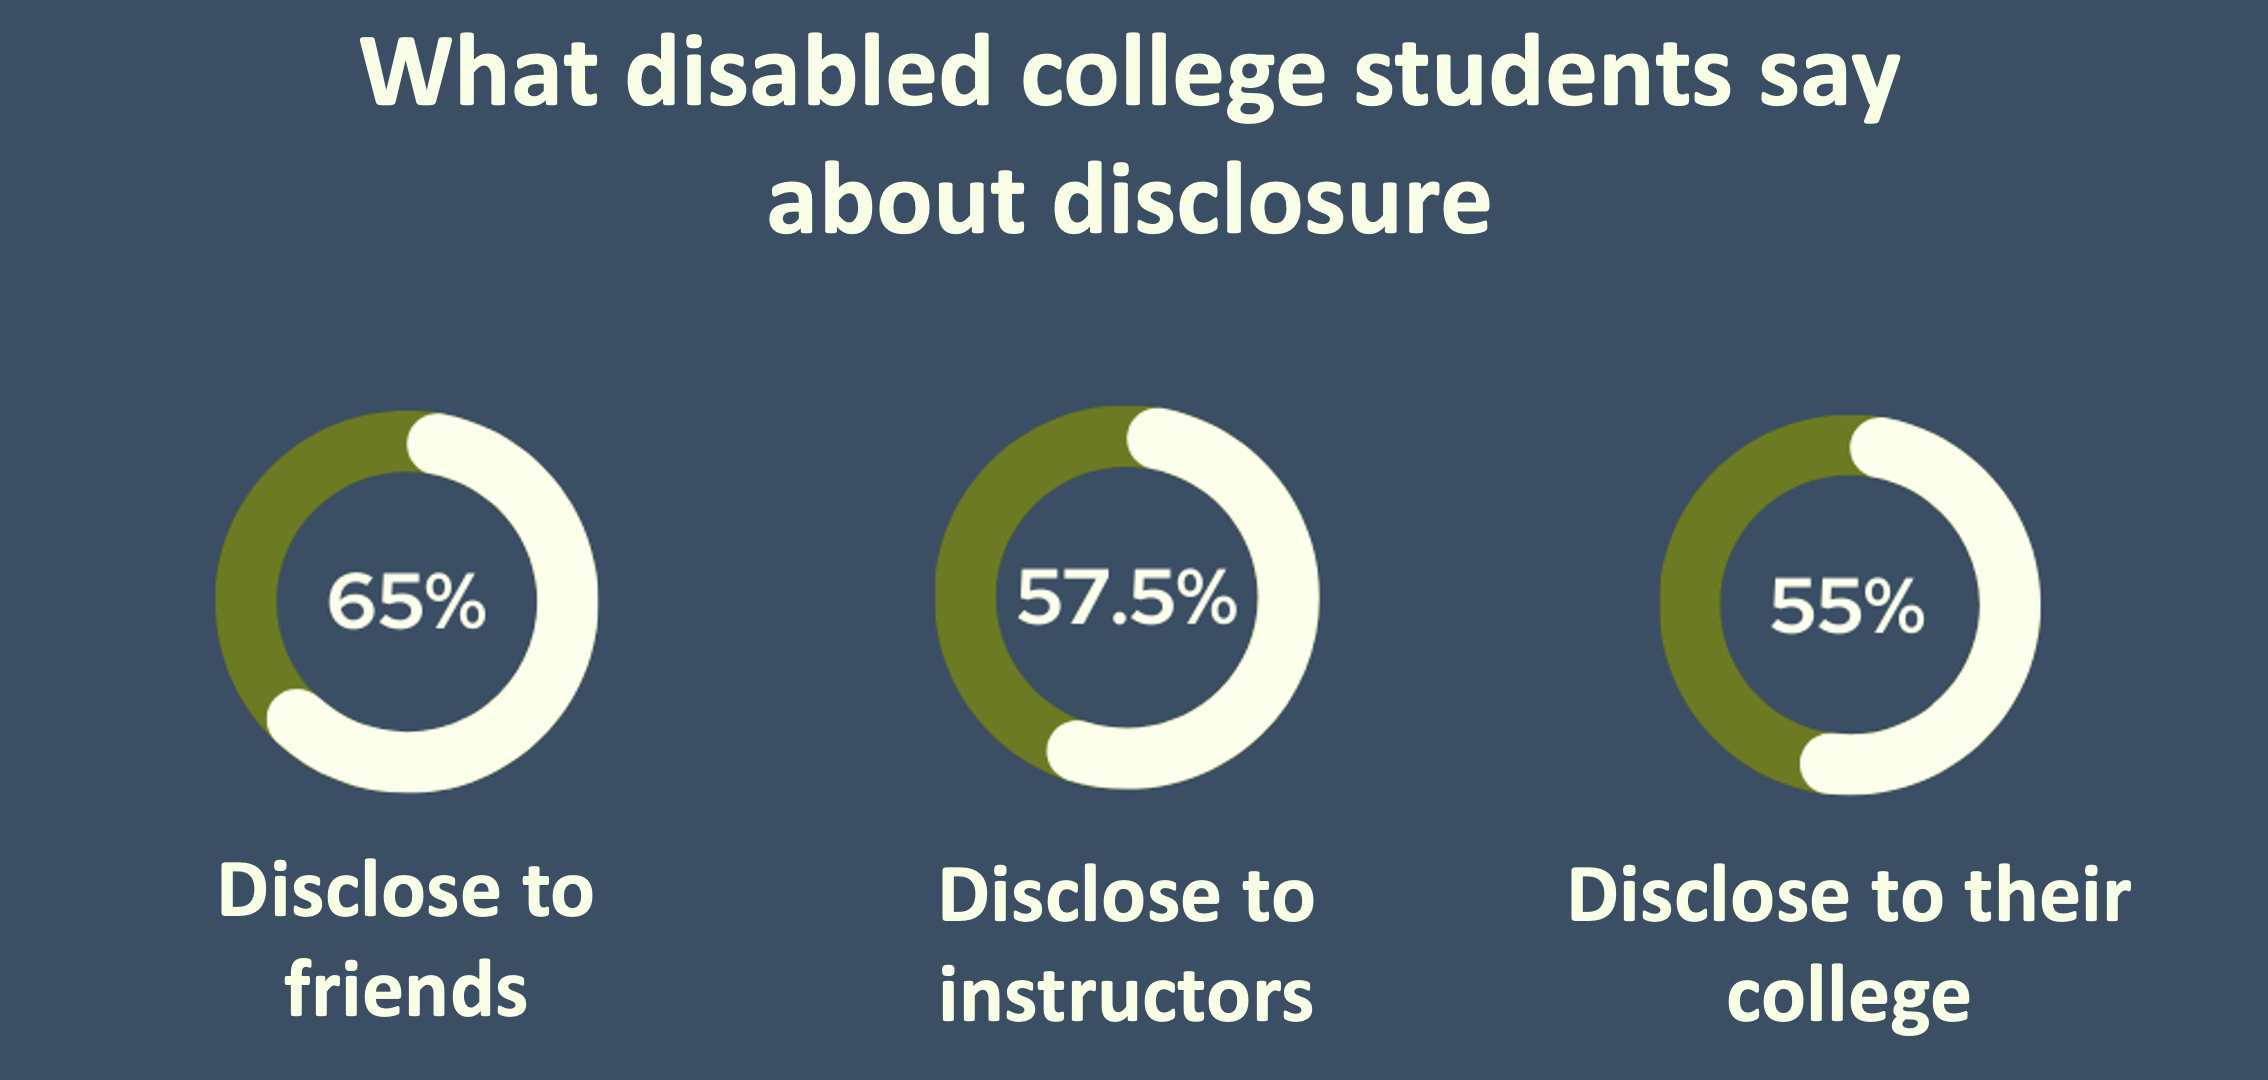 A graphical representation from April 2024 Townhall of what disabled college students say about disclosure. It features three circular charts with the following information: 65% disclose to friends, 57.5% disclose to instructors, and 55% disclose to their college. The background is a dark blue, and the charts are depicted with a combination of green and off-white colors.